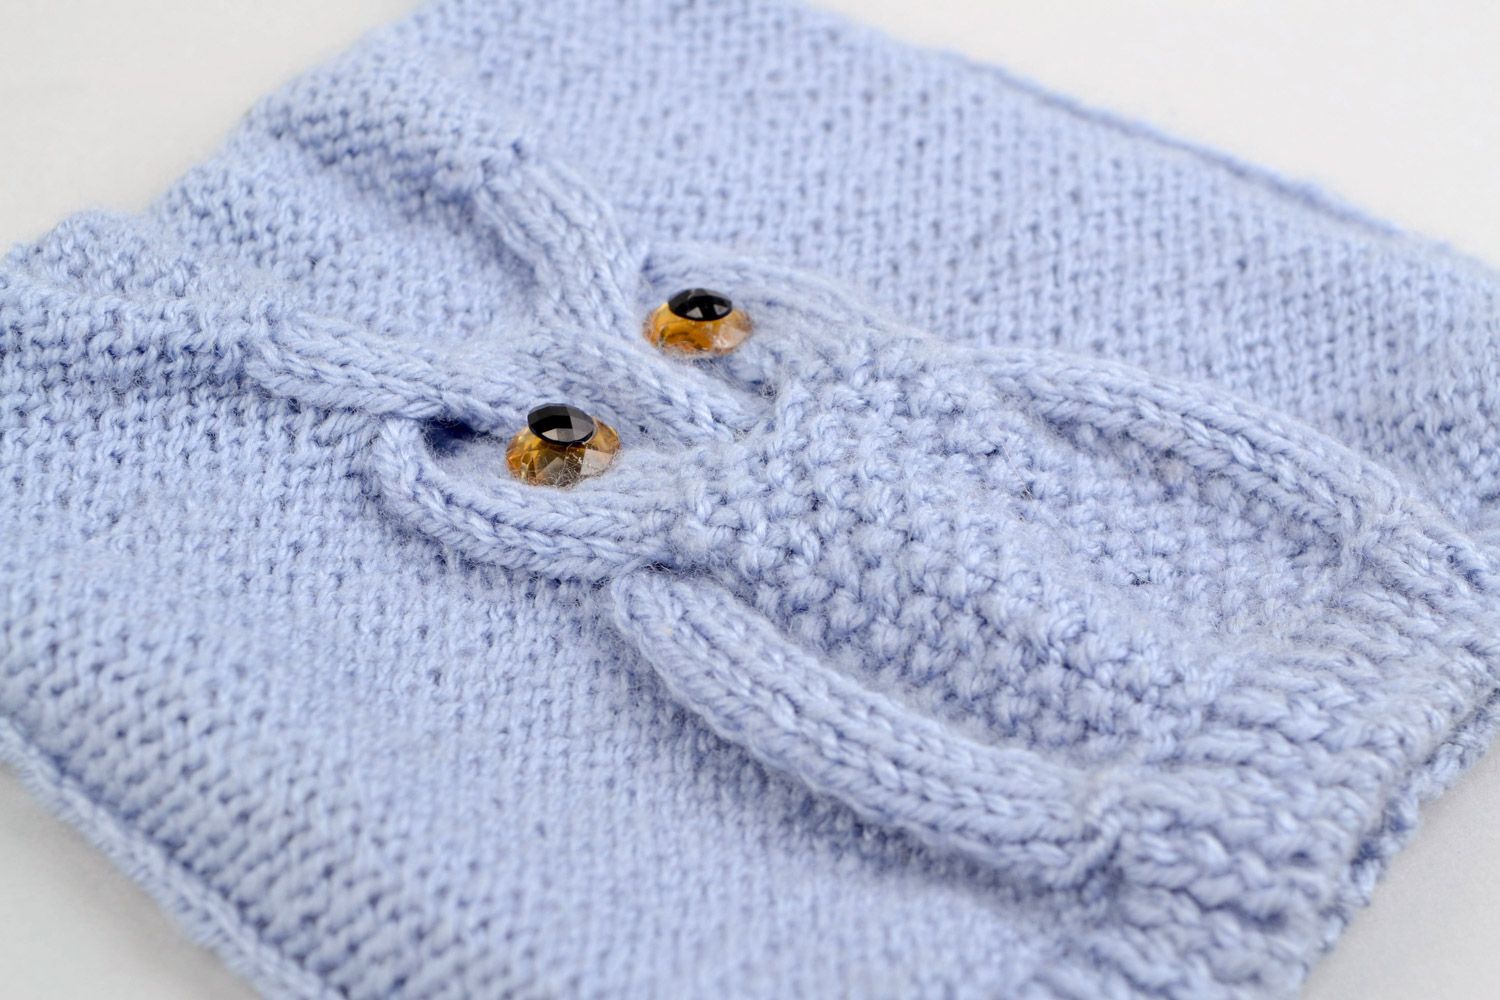 Rectangular handmade blue knitted hat for baby with owl pattern made of acrylic yarns photo 1